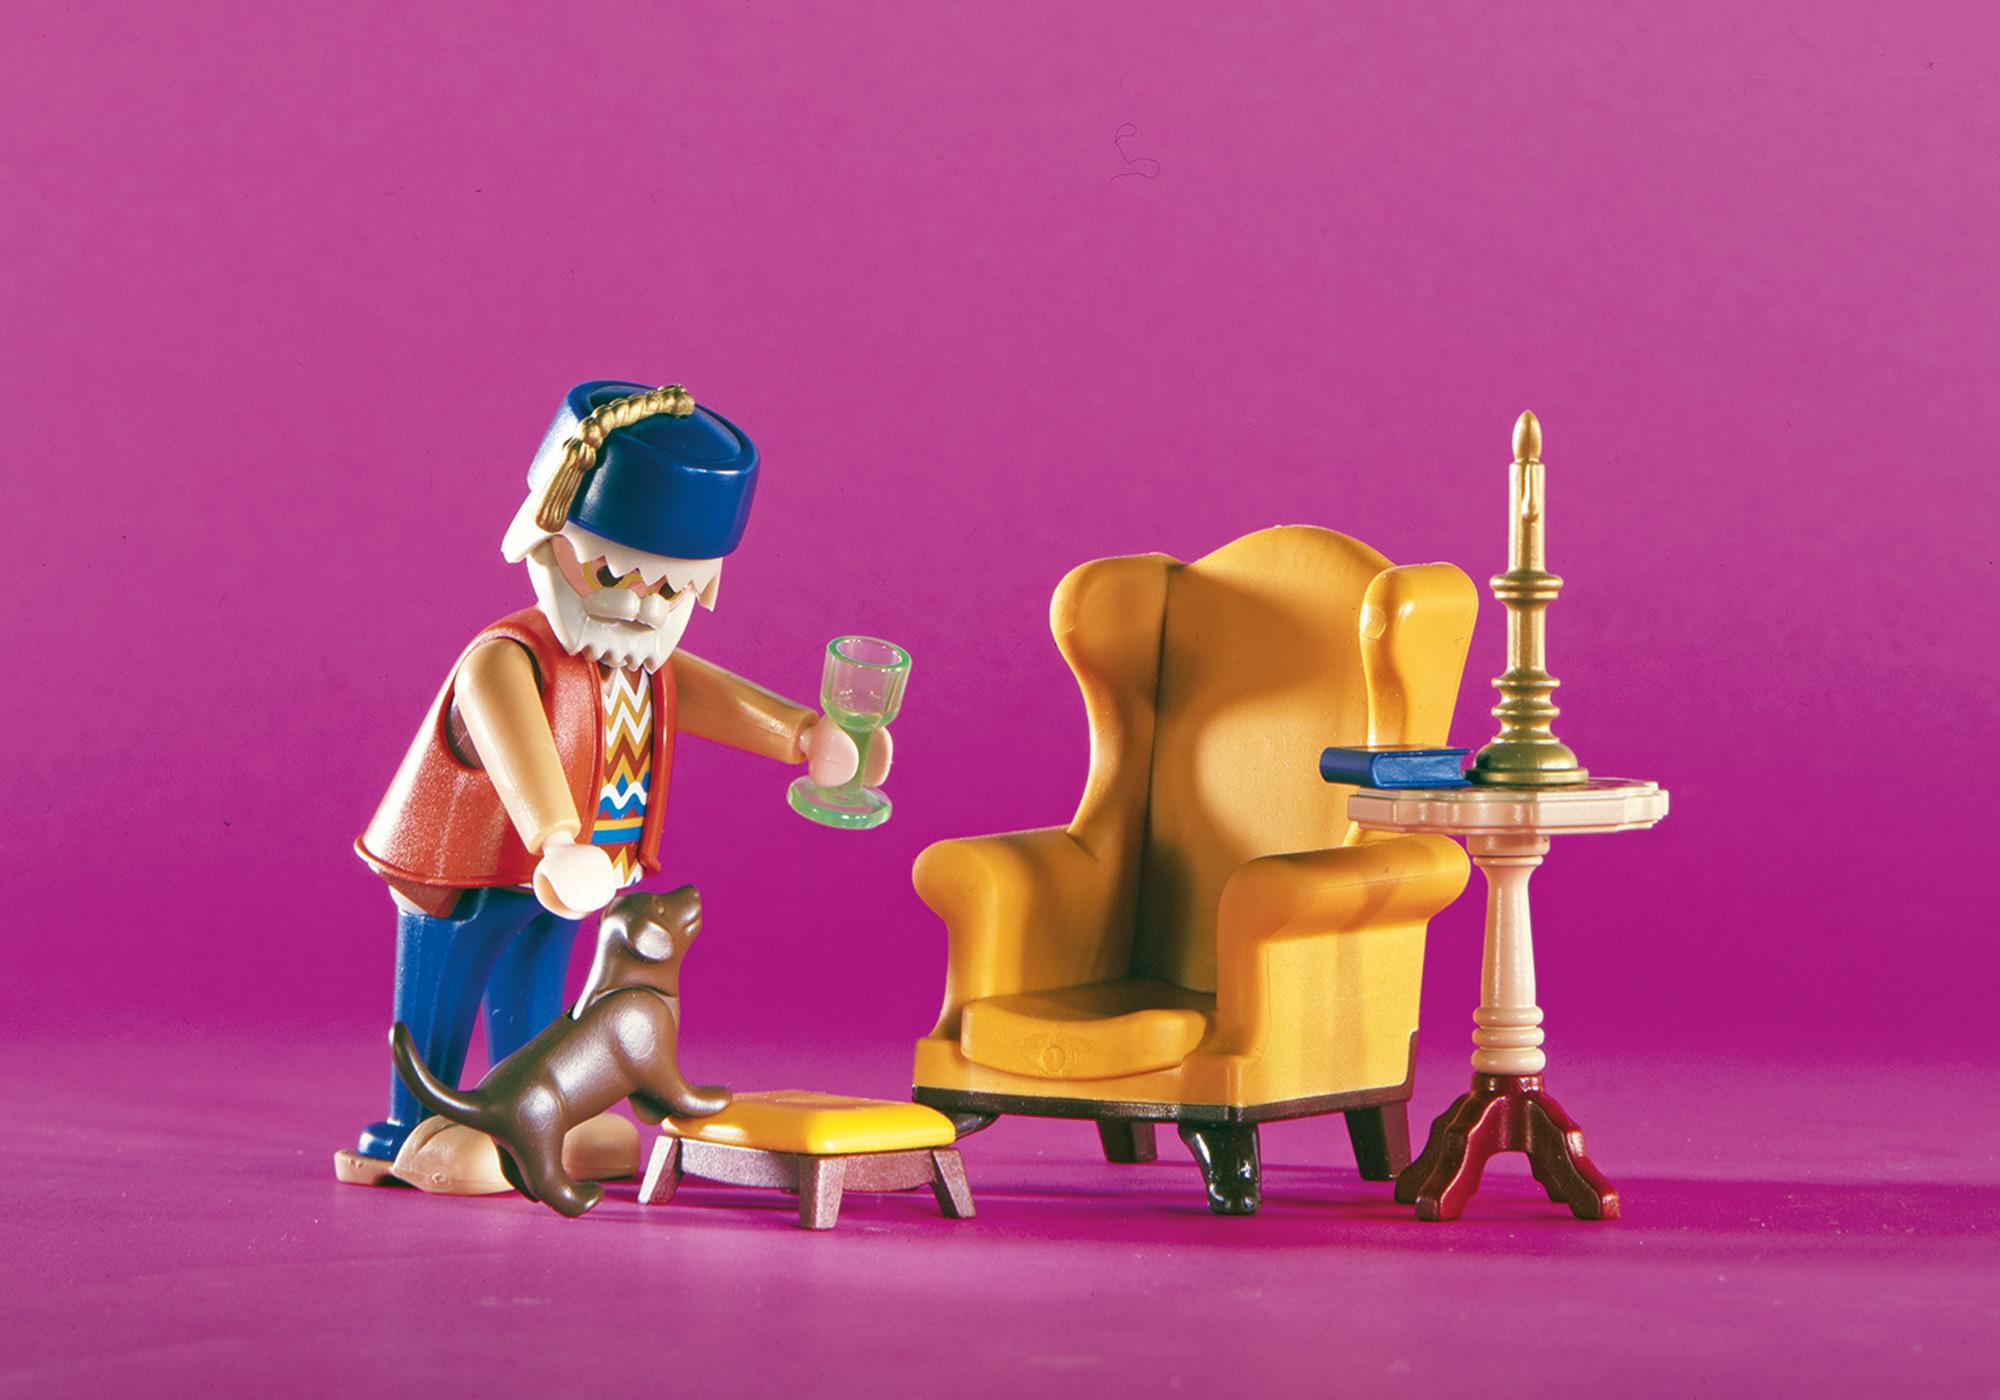 Playmobil Living Room  Playmobil, Stofftiere, Play mobile